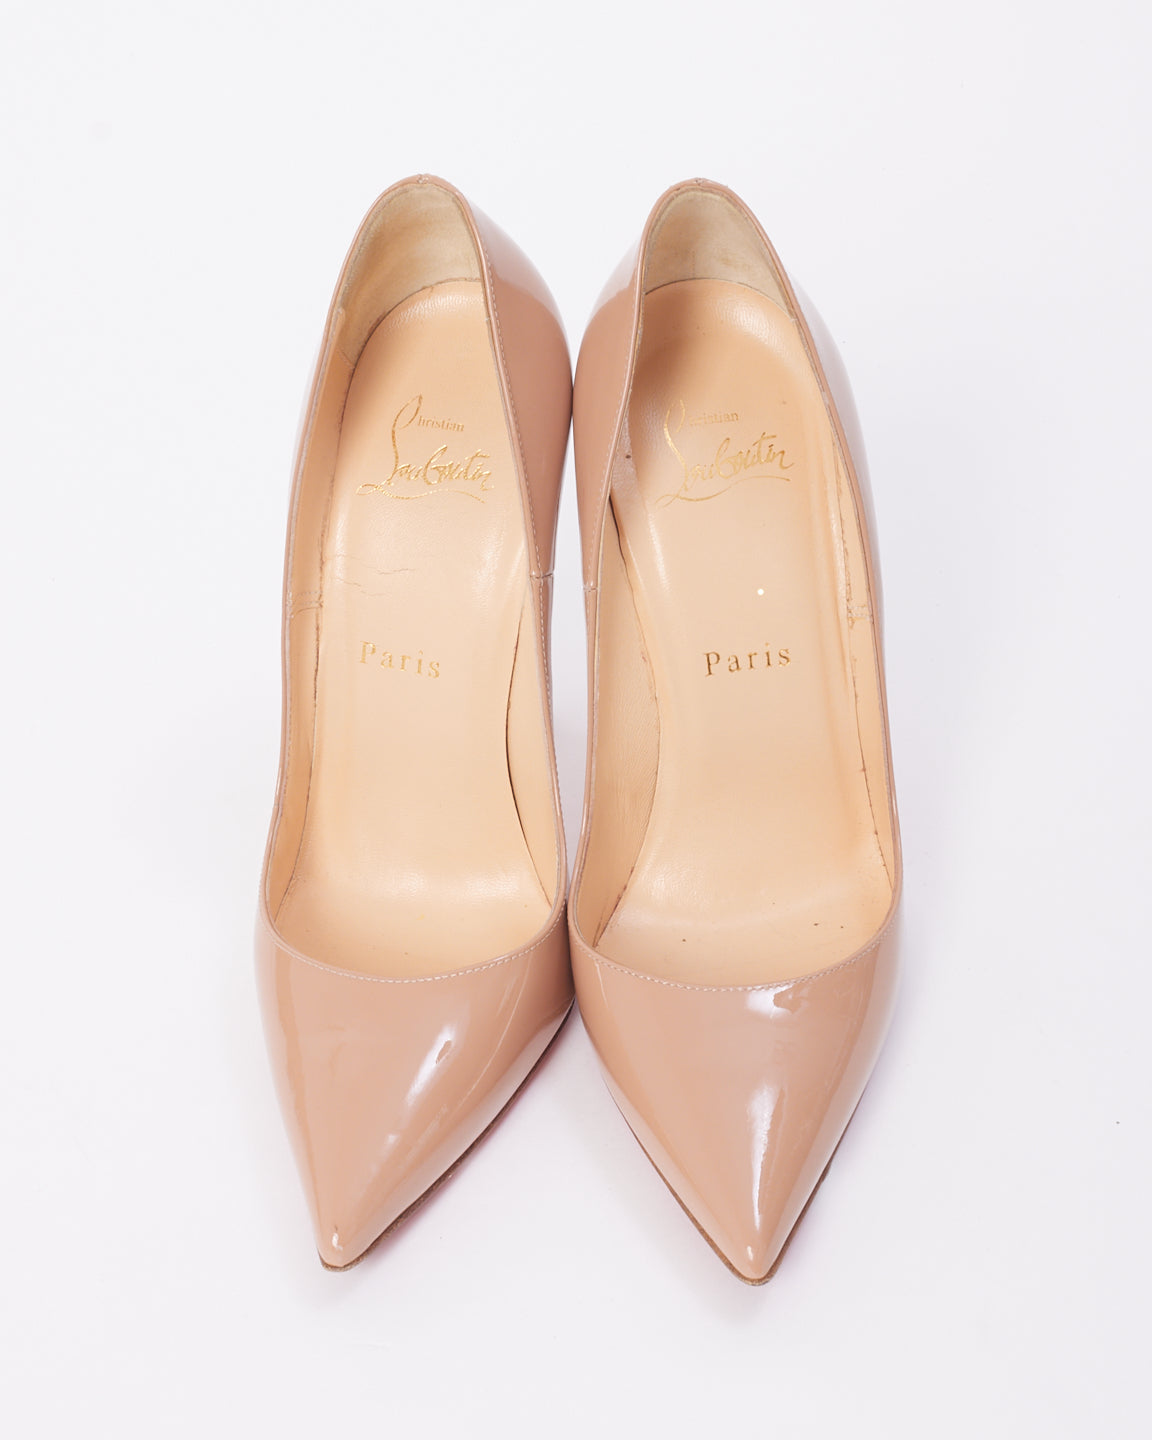 Christian Louboutin Nude Patent Leather So Kate 120mm Pumps - 36.5